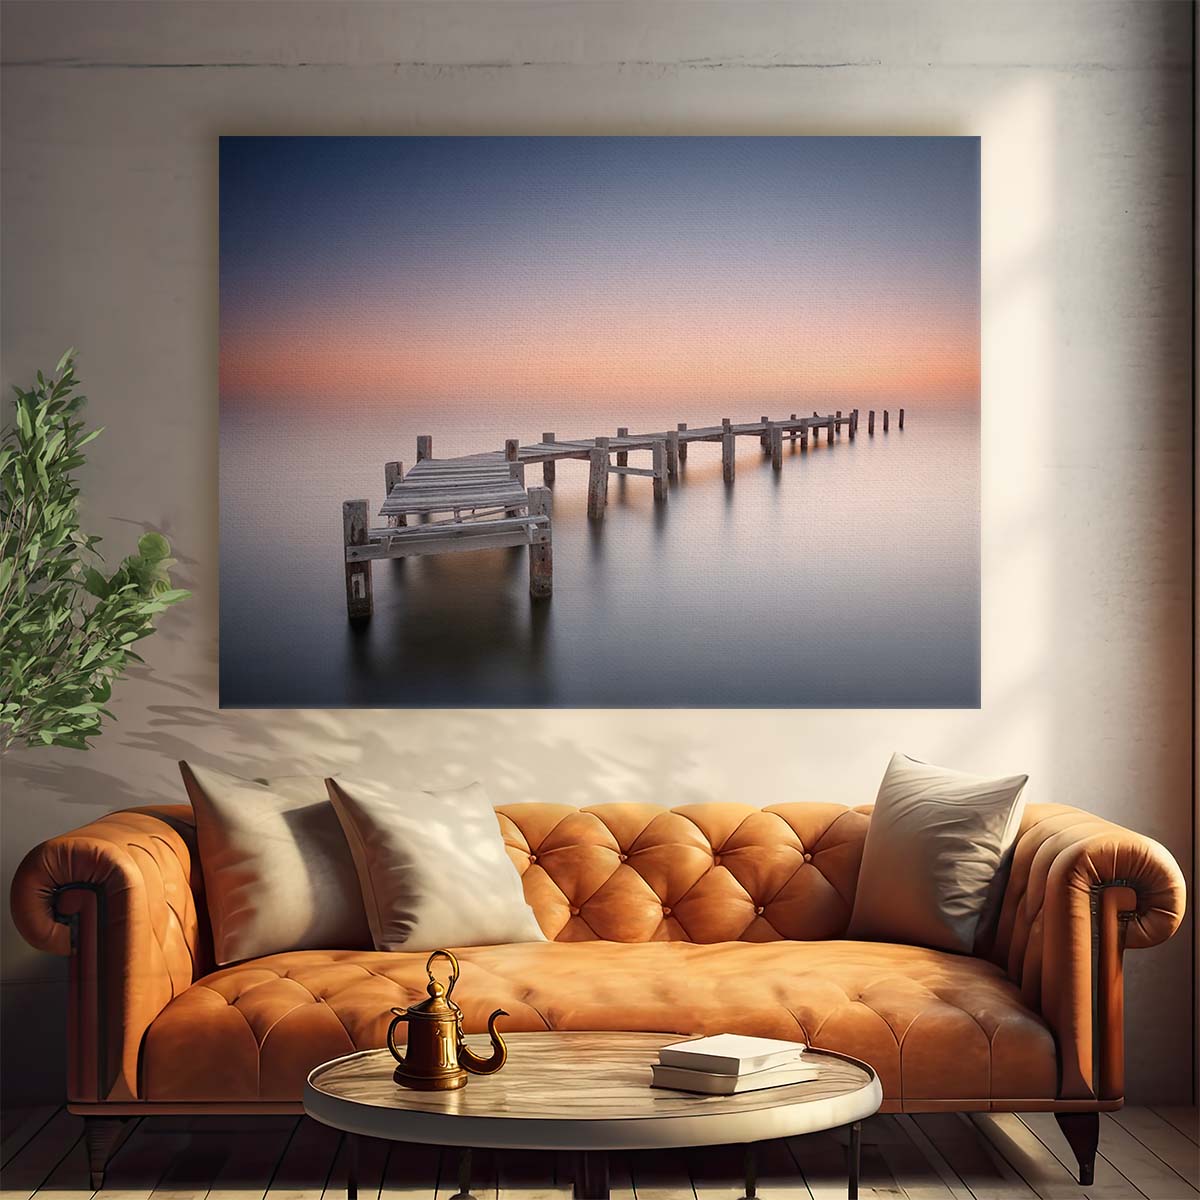 Serene Sunset Seascape Old Wooden Pier Wall Art by Luxuriance Designs. Made in USA.